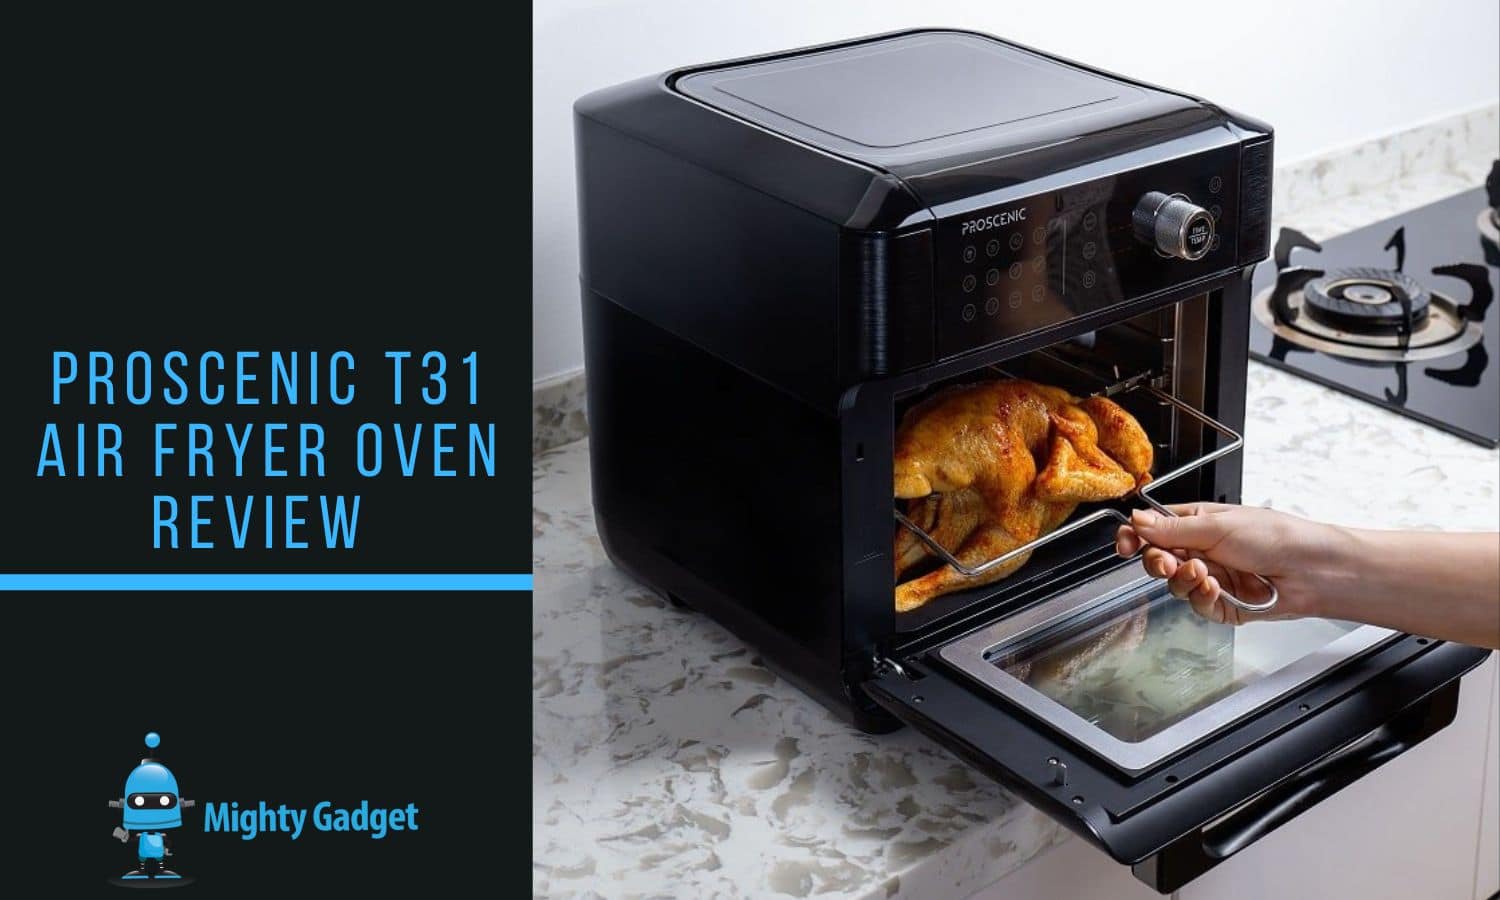 Proscenic T31 Air Fryer Oven Review – Smart App Control & Rotisserie for Perfect Chicken